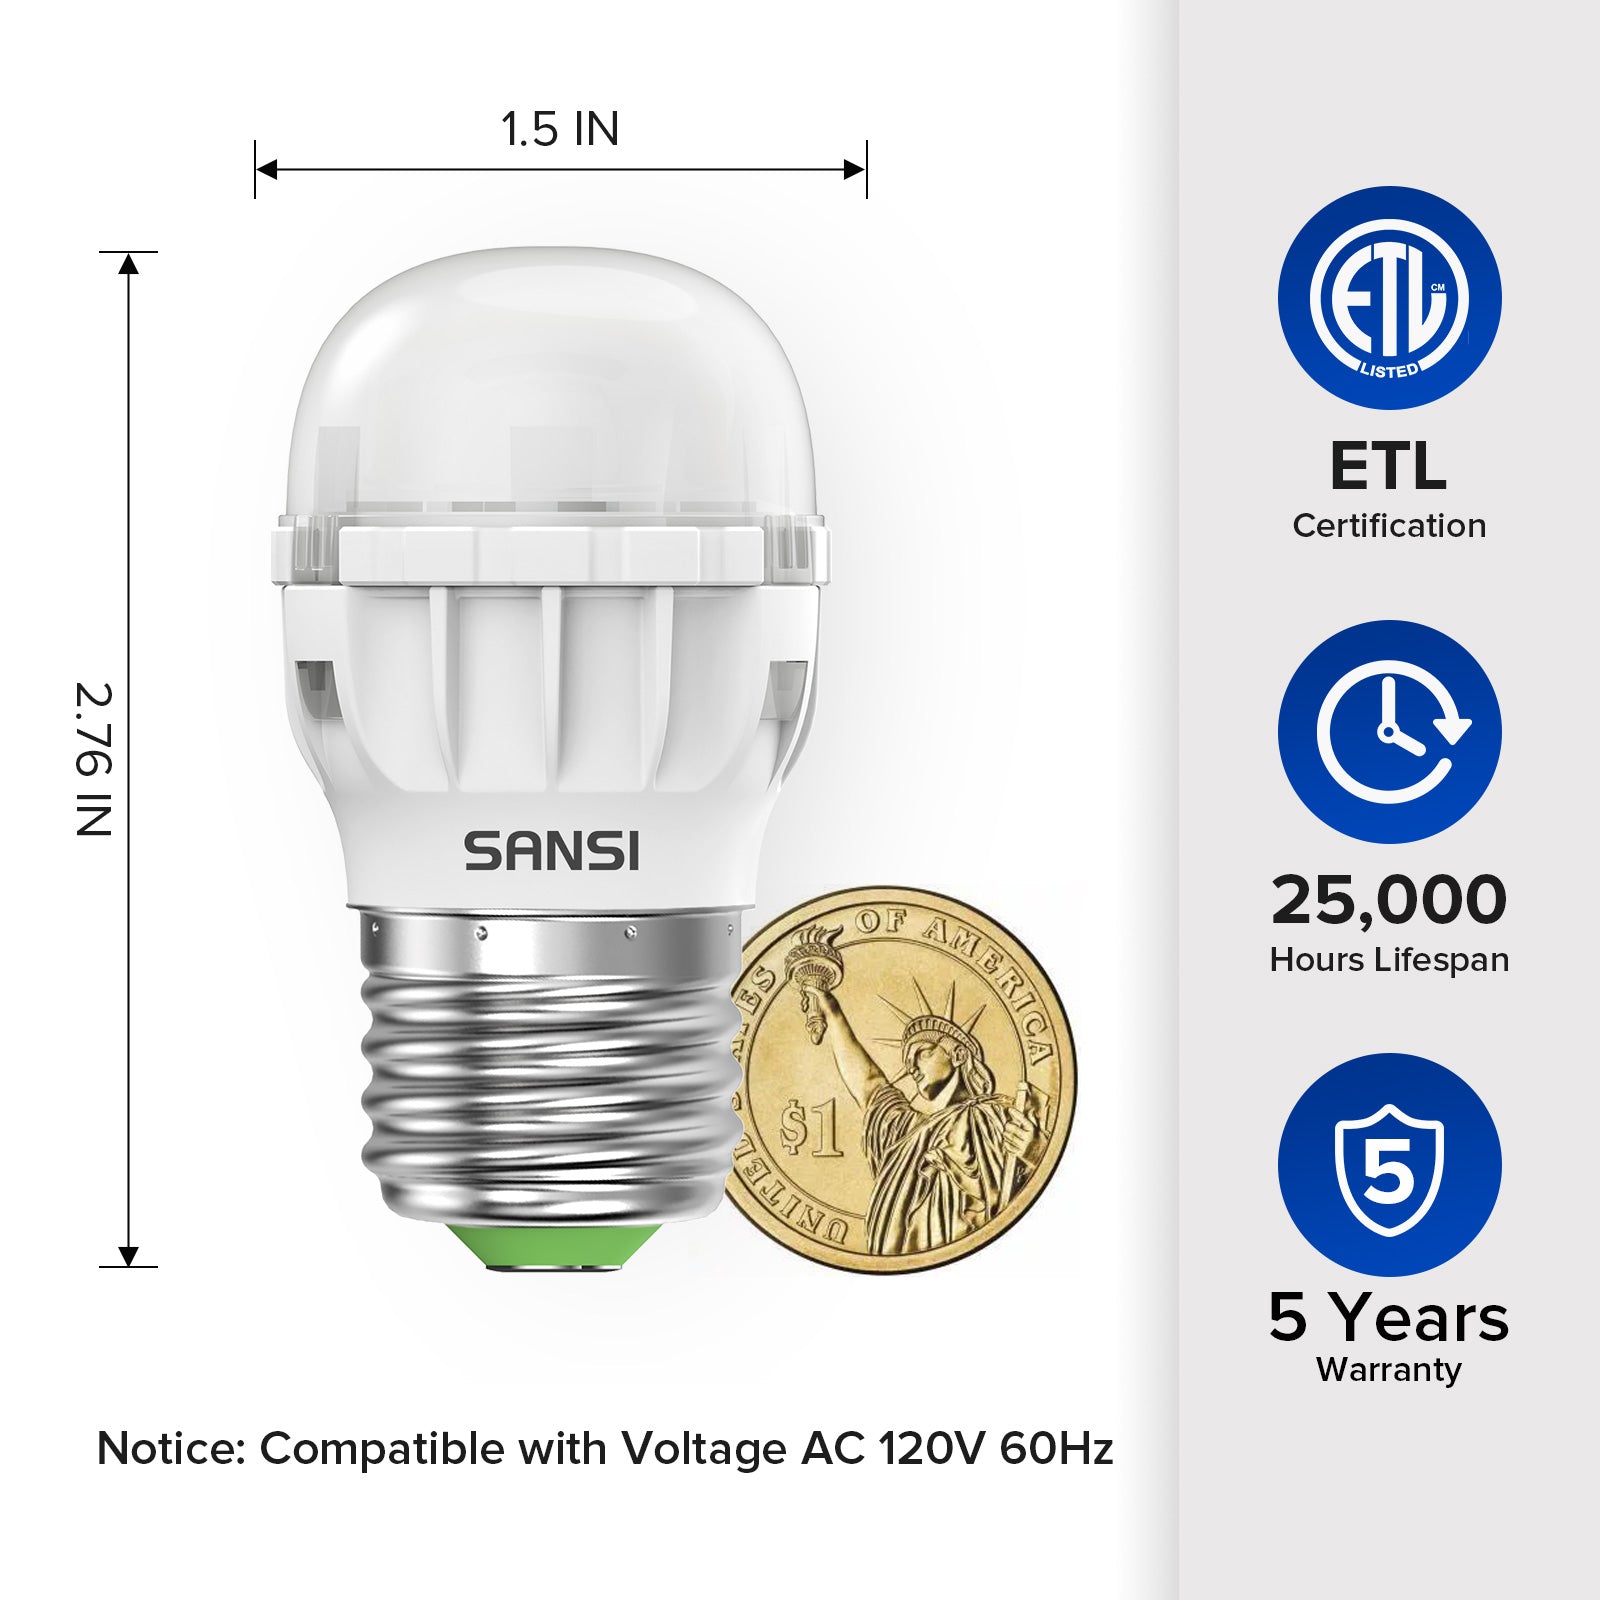  A11 7W LED Light Bulb has ETL certification, 25,000 hours lifespan and 5-year warranty